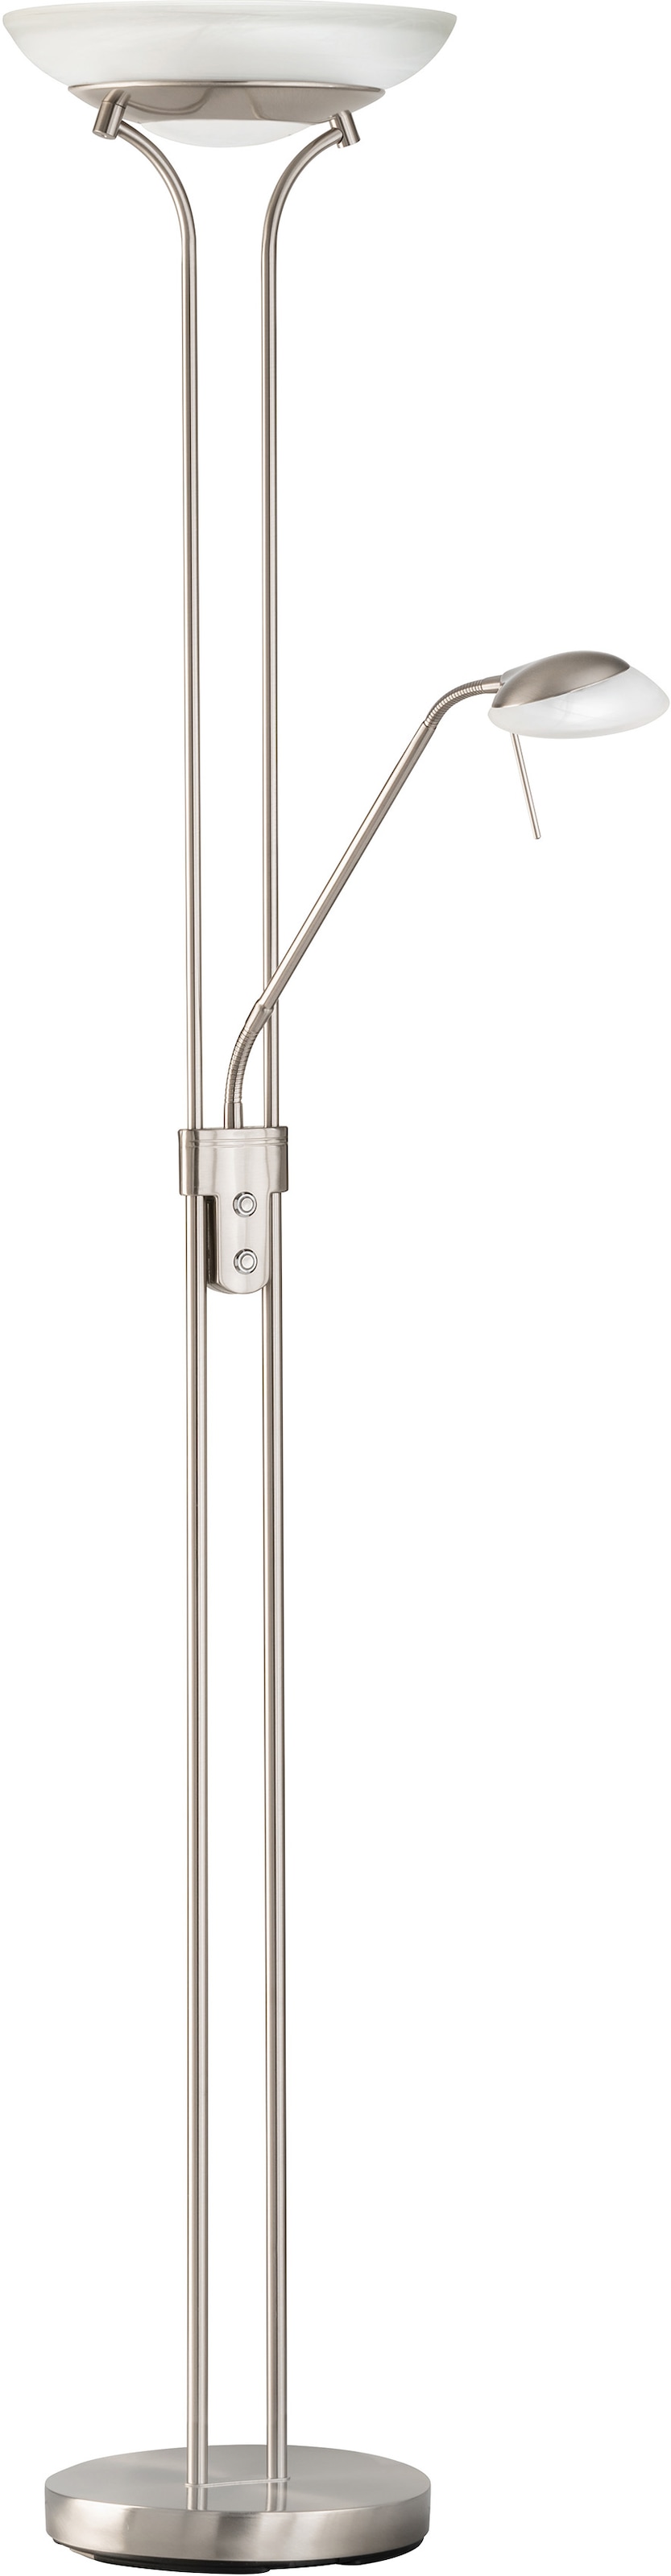 FISCHER & HONSEL LED TW«, bei OTTO 1 Stehlampe flammig-flammig »Pool